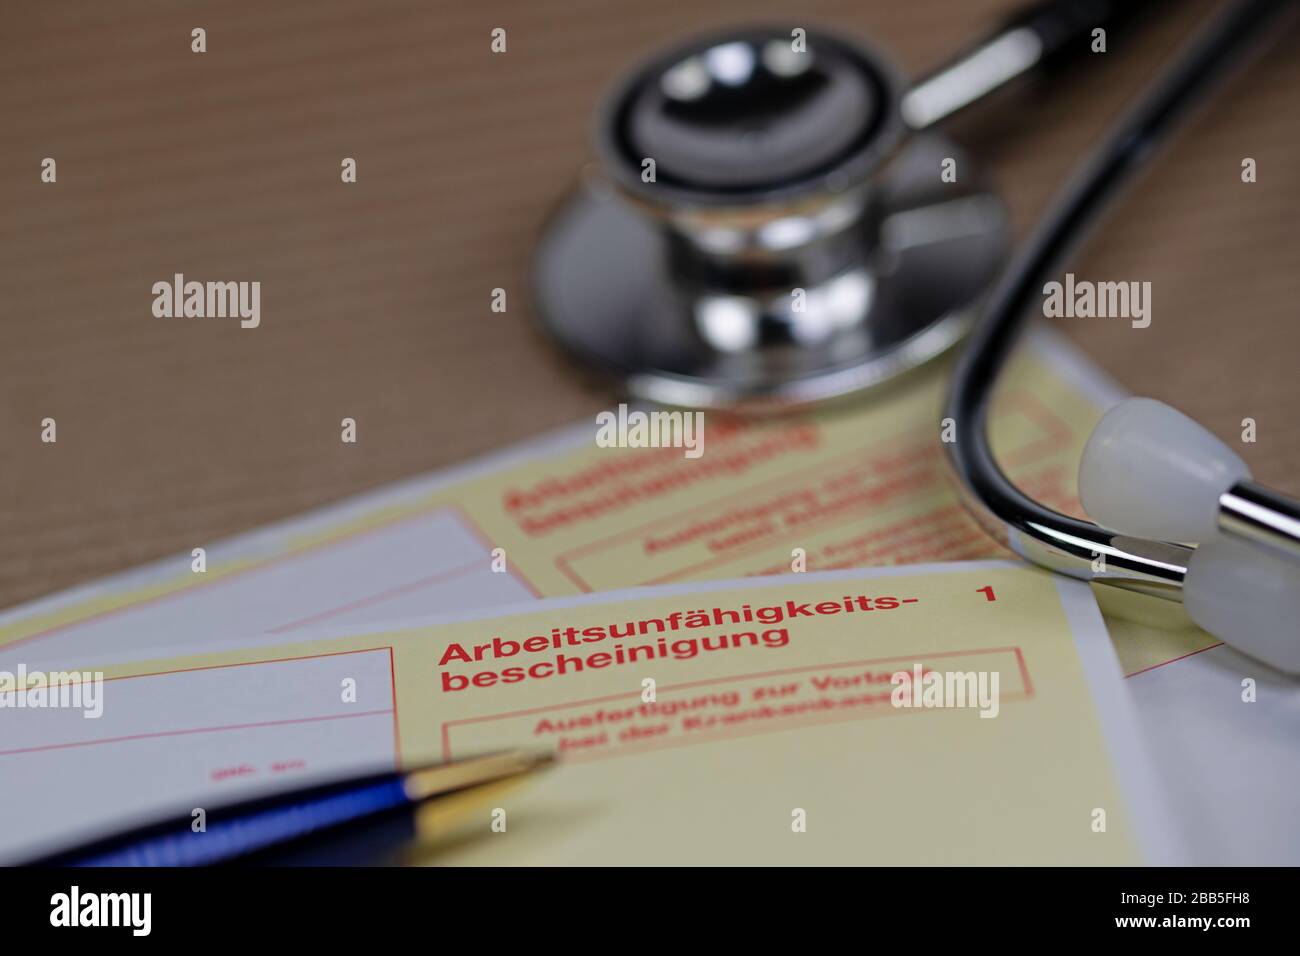 Arbeitsunfahigkeitsbescheinigung Disability Certificate For Submission To The Health Insurance Company And Employer Stock Photo Alamy